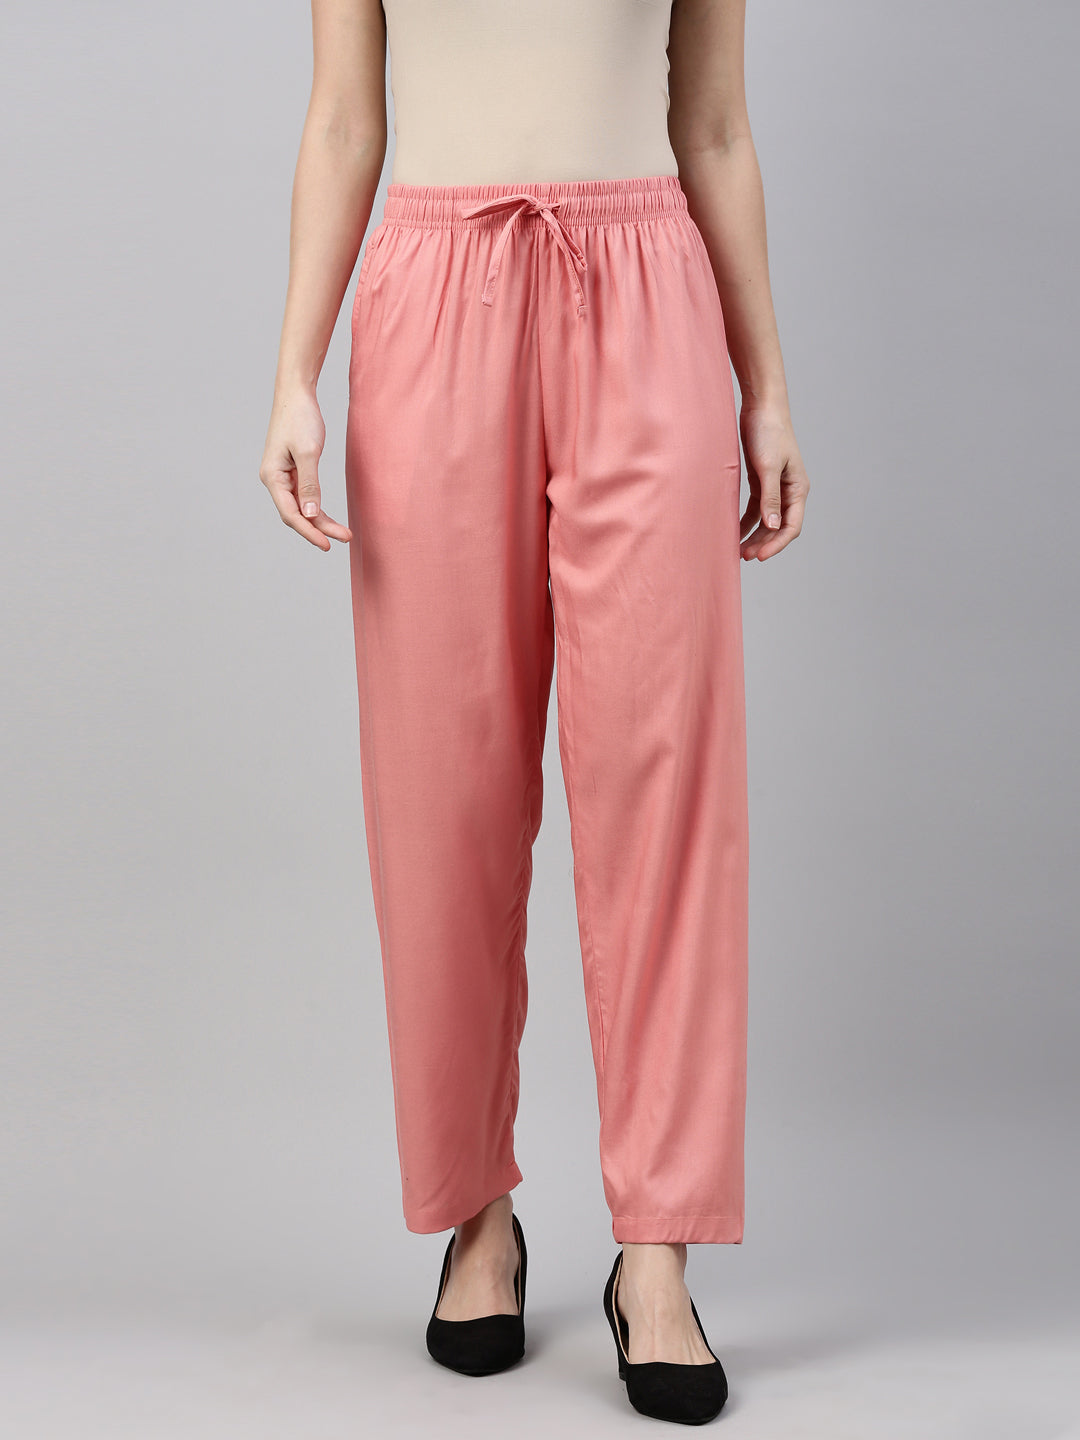 Buy Peach and Magenta Pink Combo of 2 Women Trouser Pants Cotton Flax  Fabric for Best Price, Reviews, Free Shipping